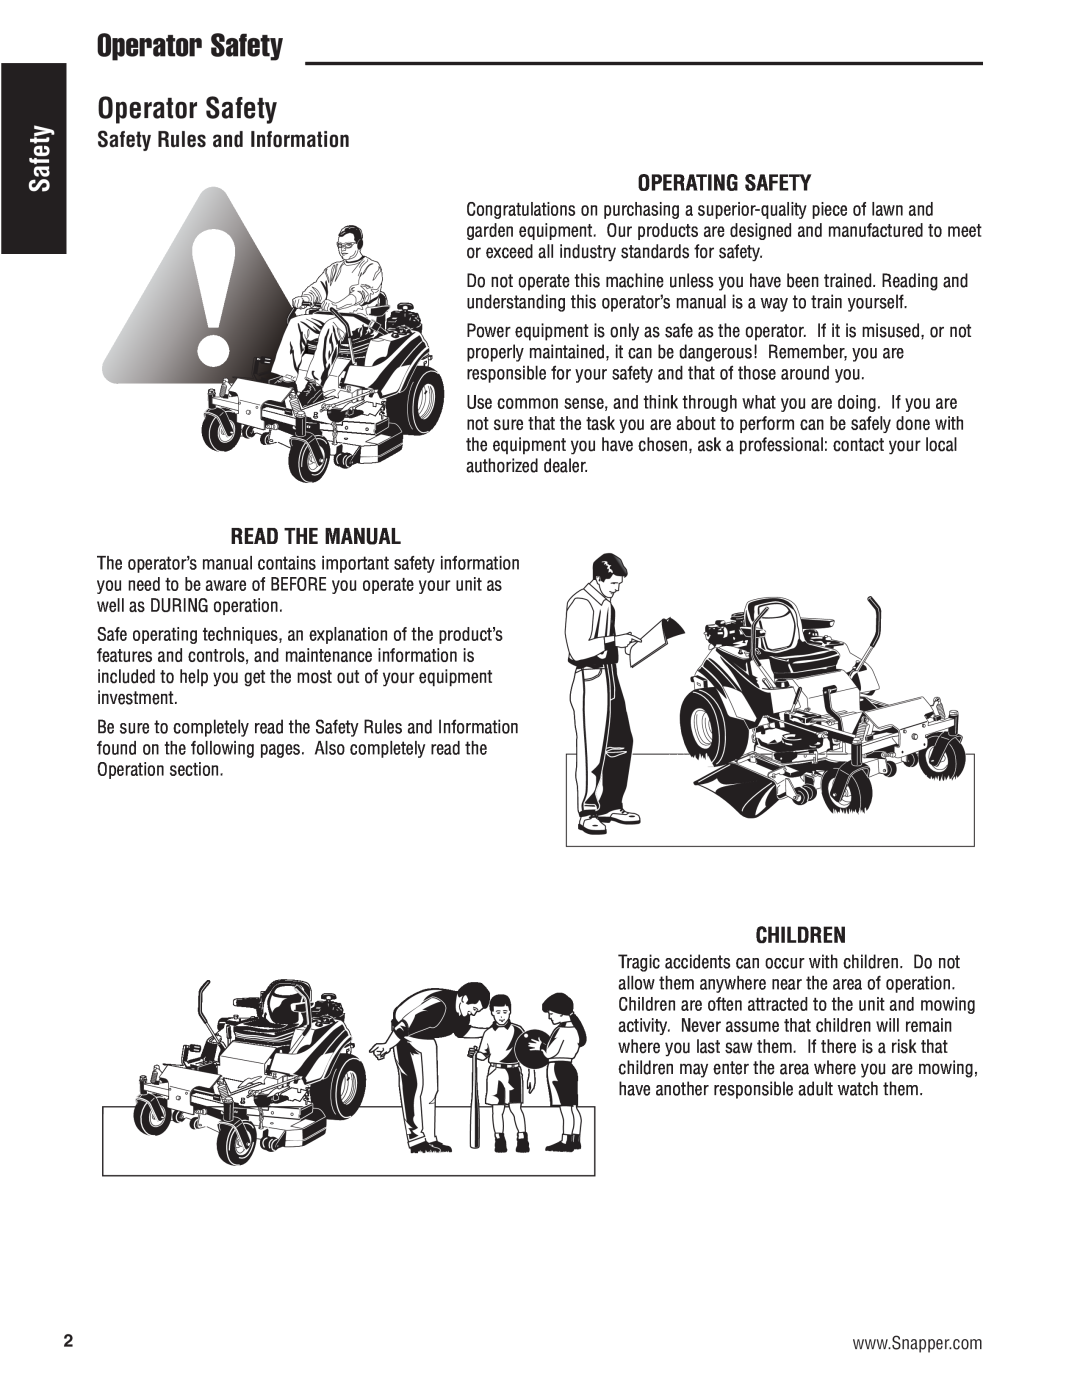 Snapper 500Z manual Operator Safety, Safety Rules and Information OPERATING SAFETY, Read The Manual, Children 